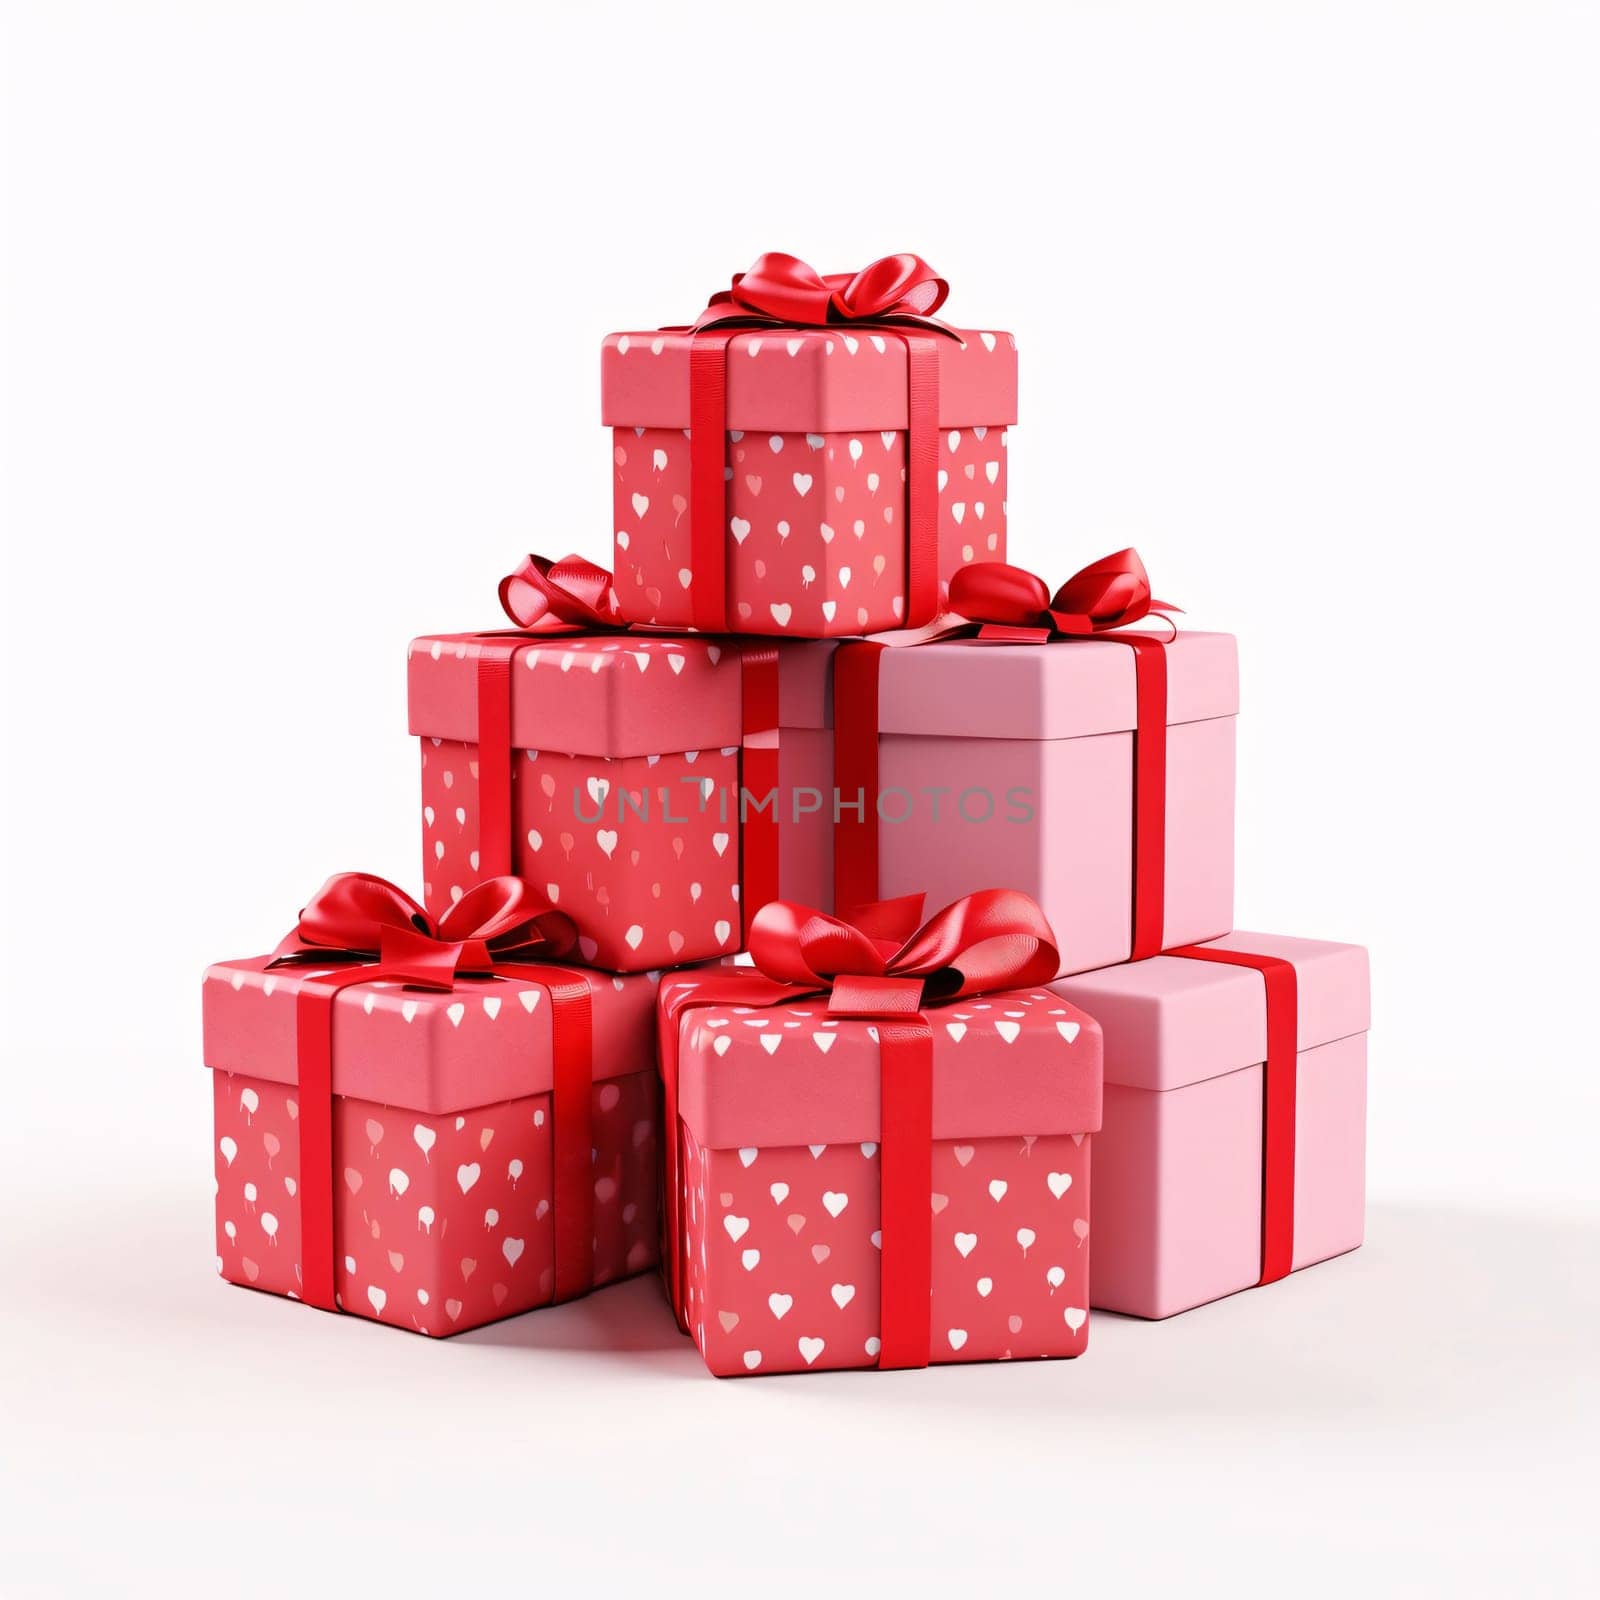 White gifts with red hearts and red bows, white isolated background. Gifts as a day symbol of present and love. A time of falling in love and love.